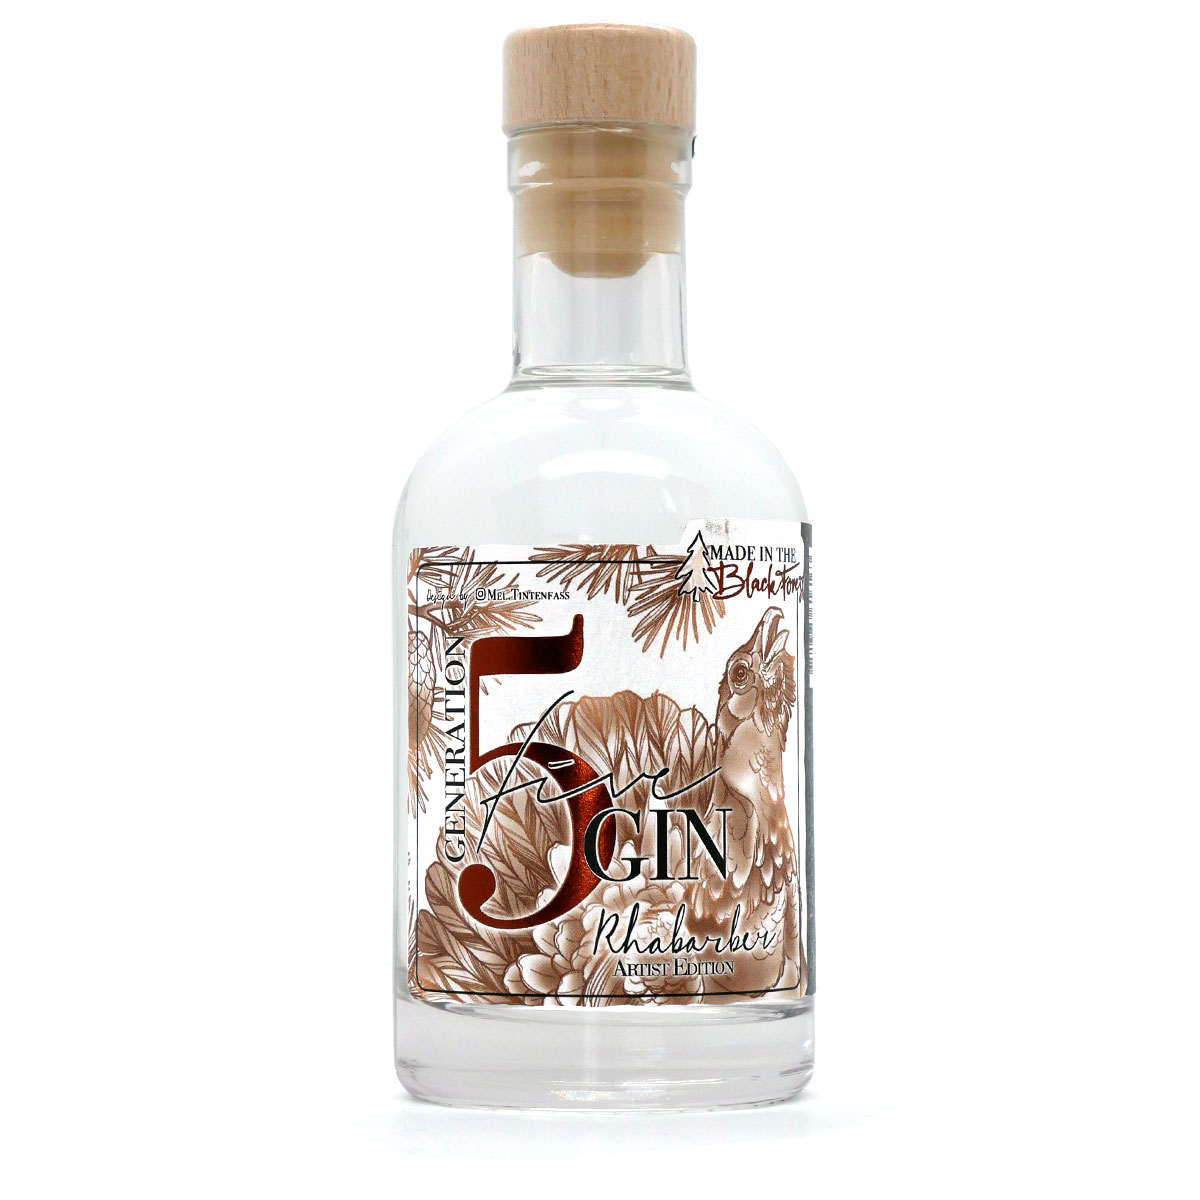 Forest - Gin 5 Gin BARREL The Generation Black